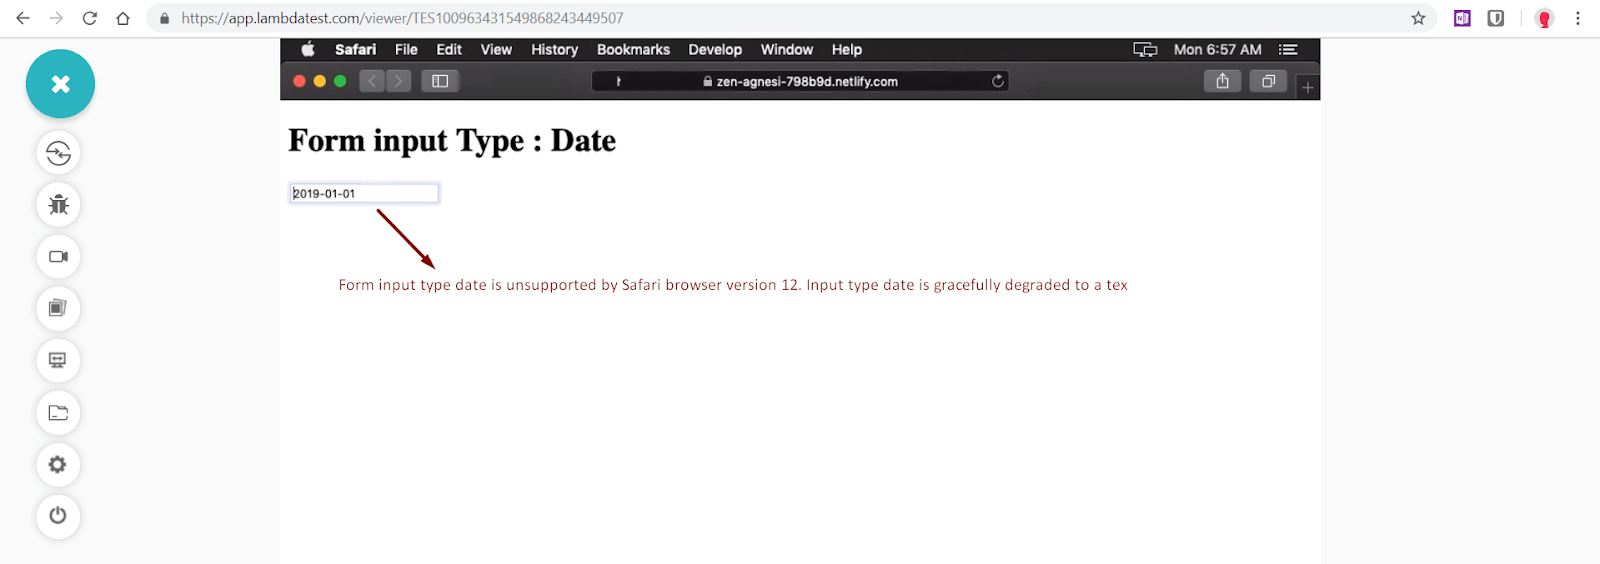 “Date” is not supported in Safari 12